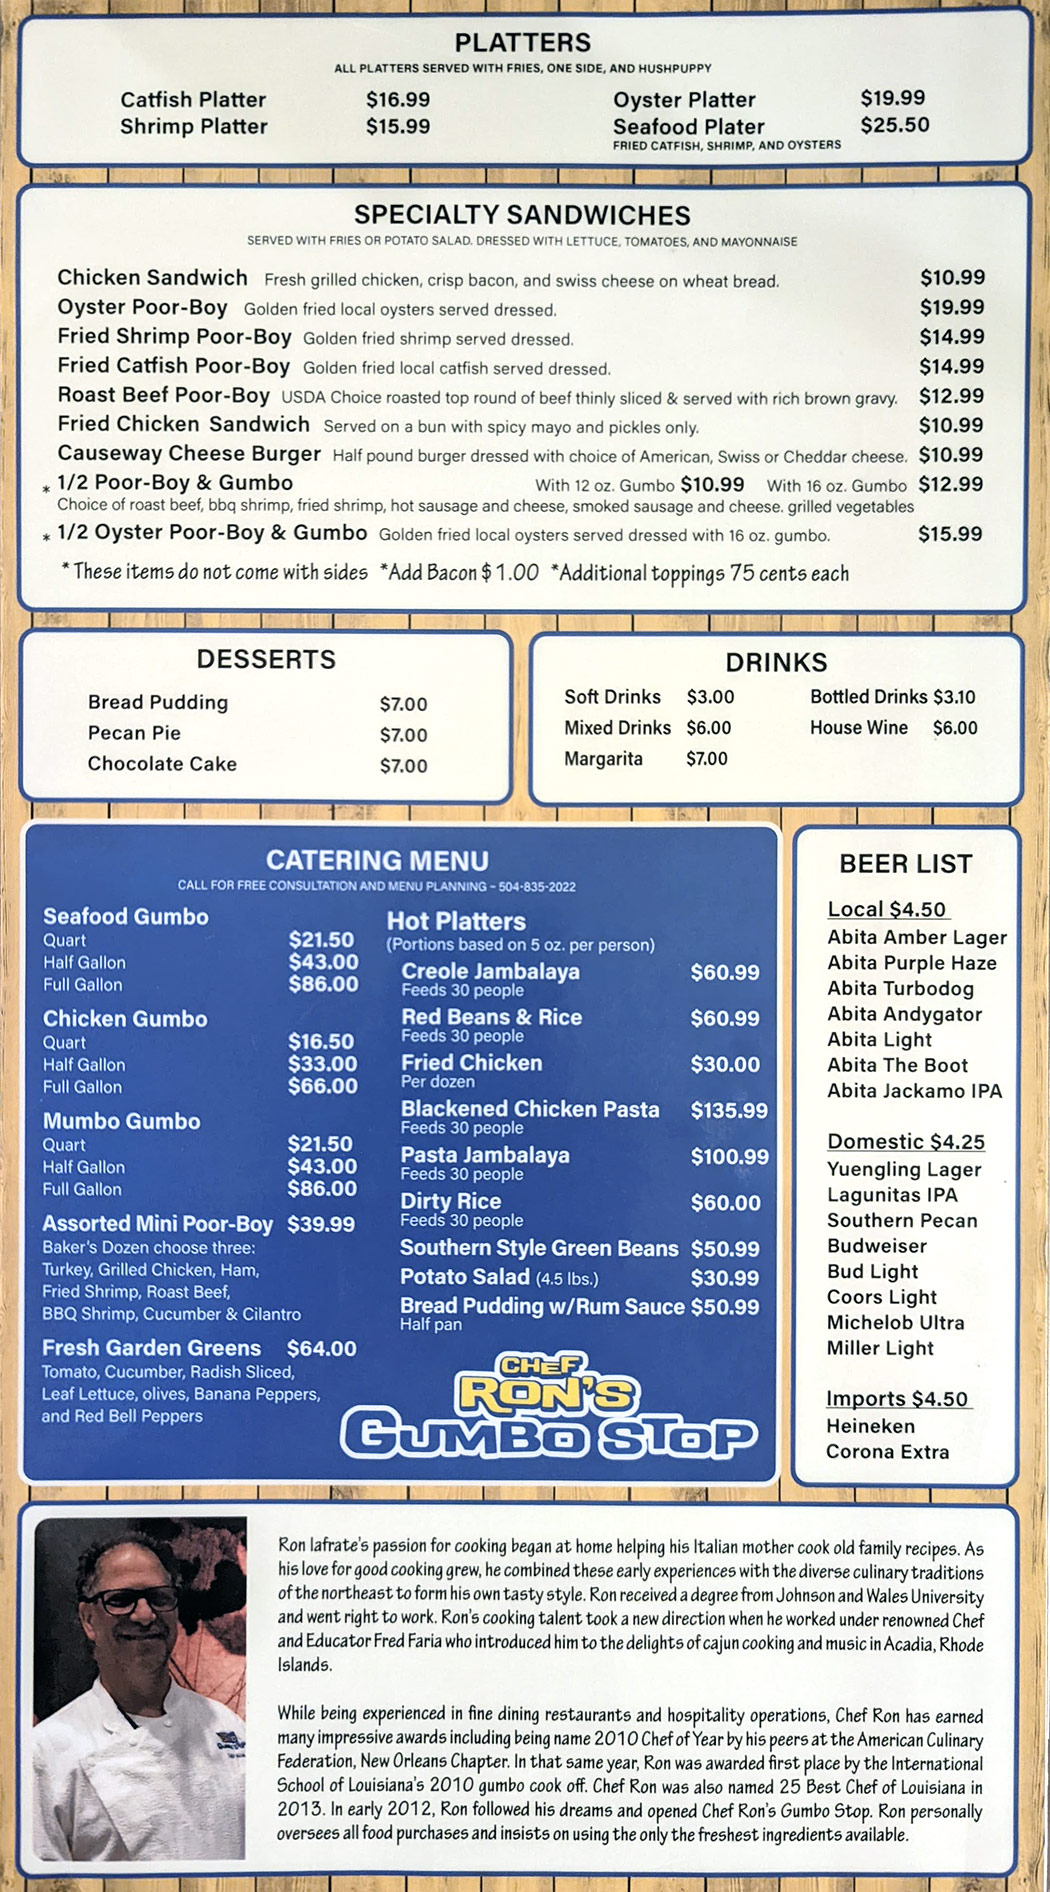 Chef Rons Gumbo Stop Menu Page 2